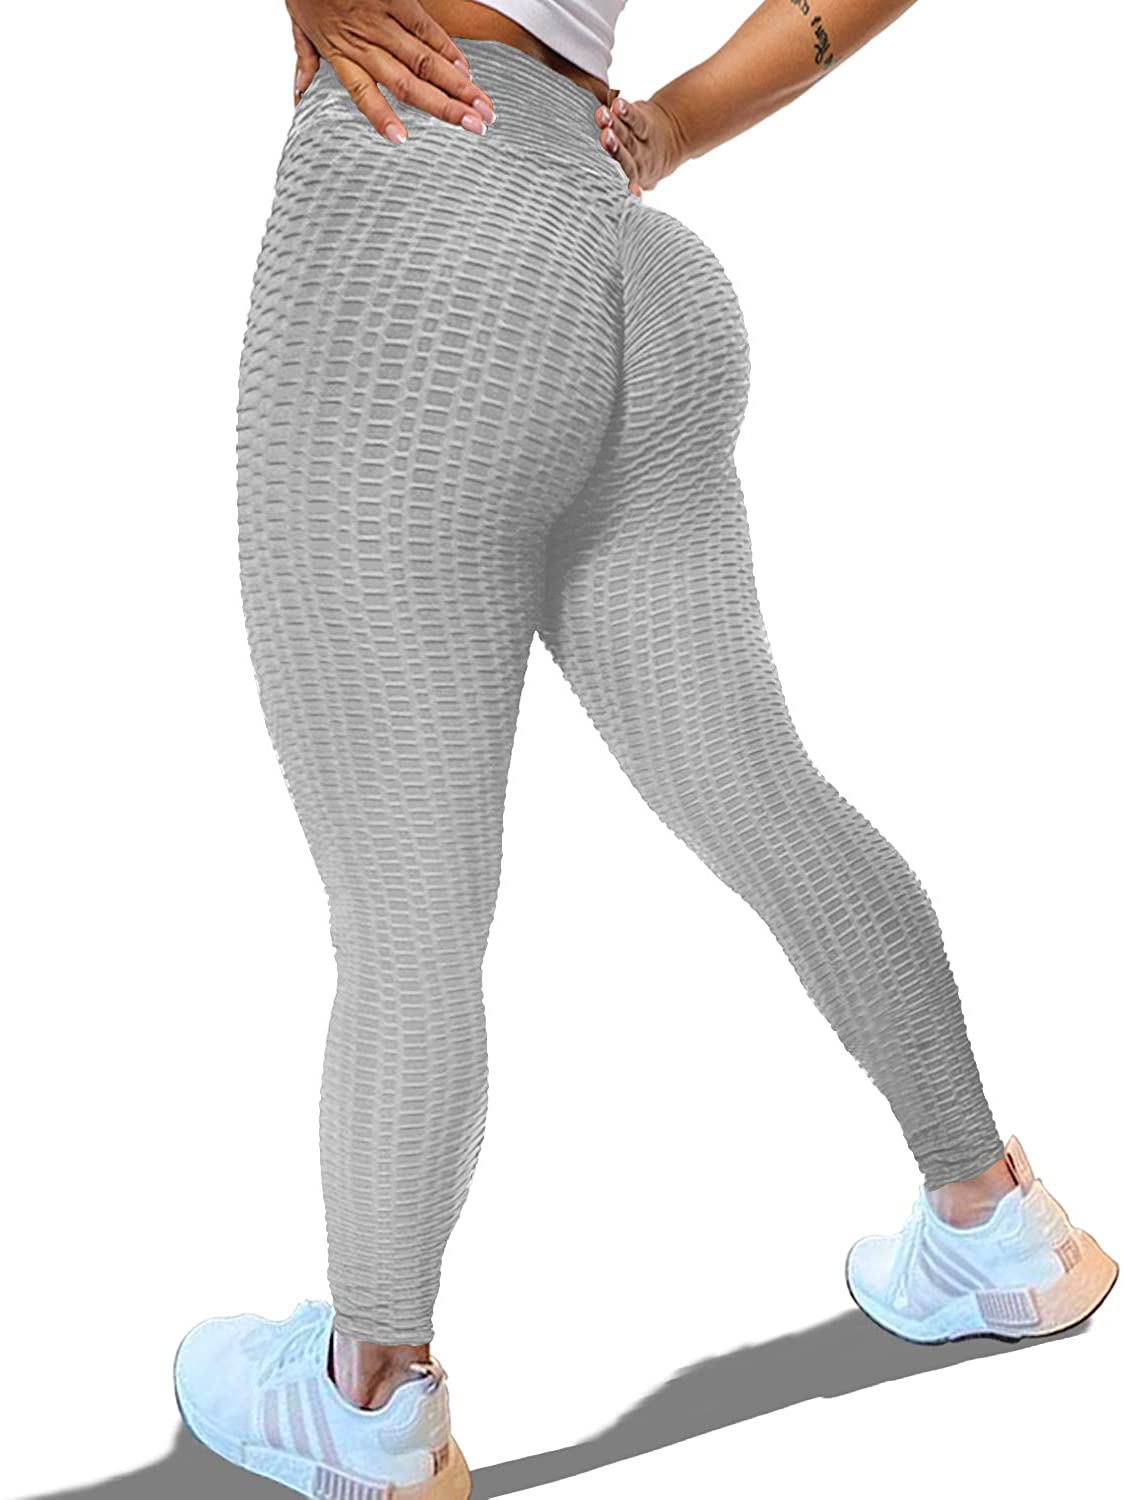 Homeparty Ruched Butt Leggings High Waisted Yoga Pants for Women Gray Small 